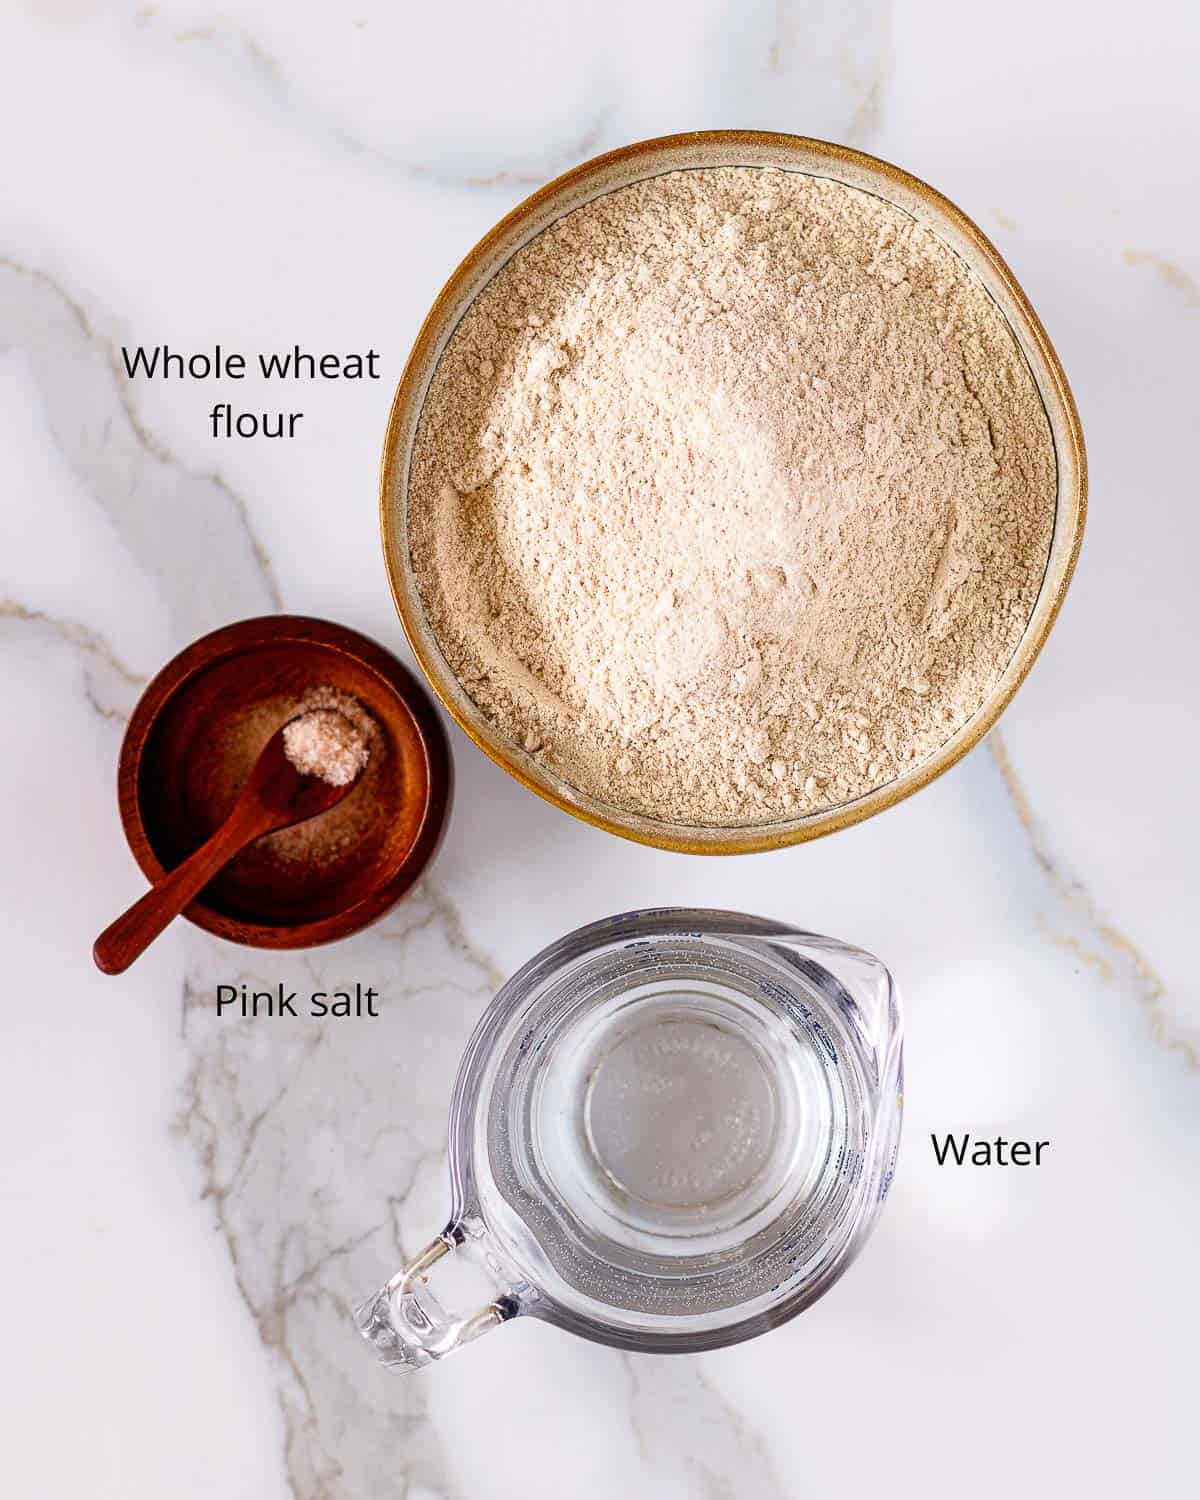 Bowl of whole whaet flour, pink salt and pitcher of water.